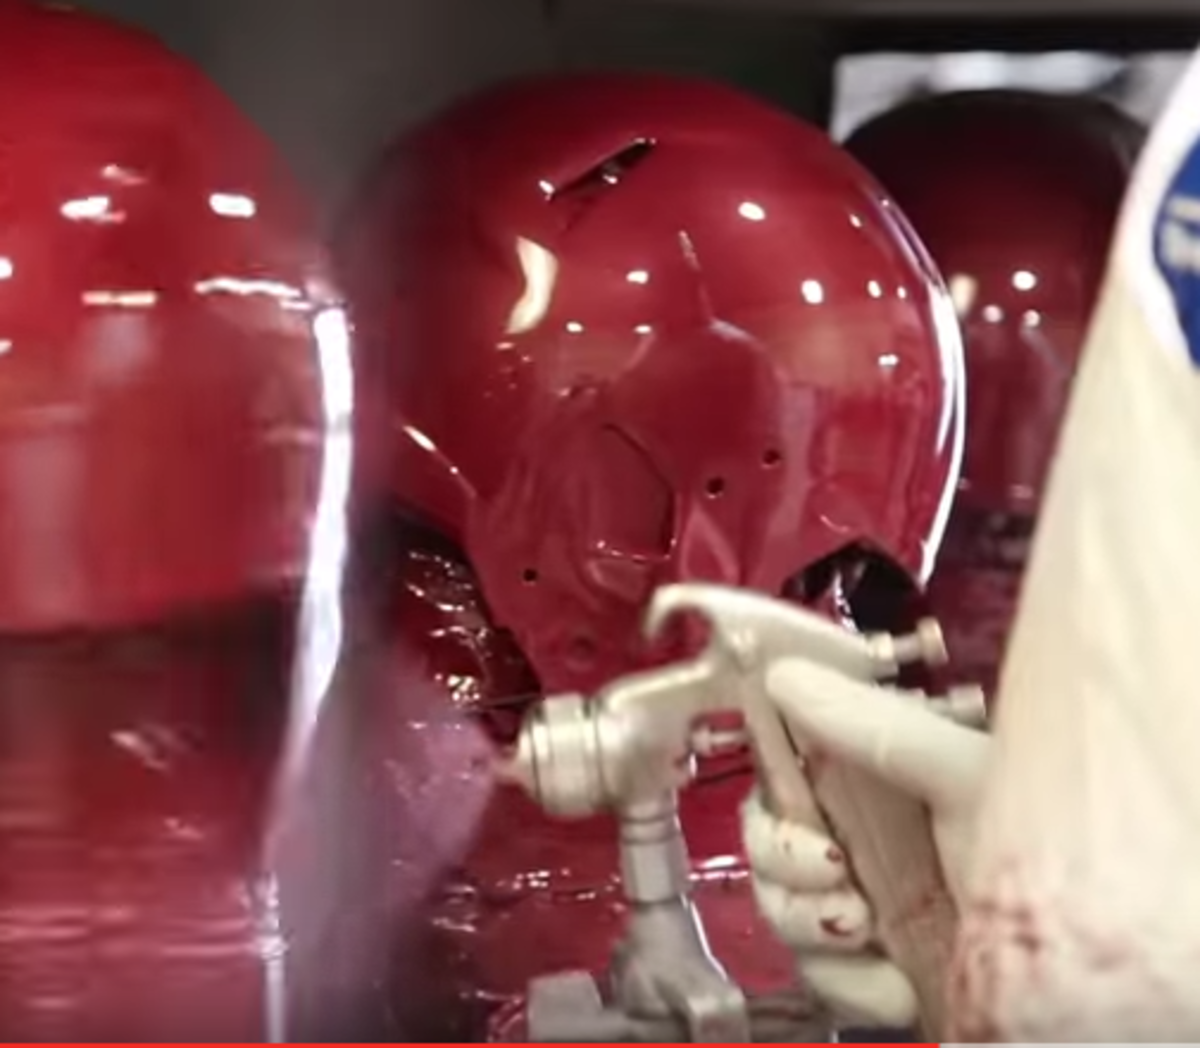 USC helmets being painted.